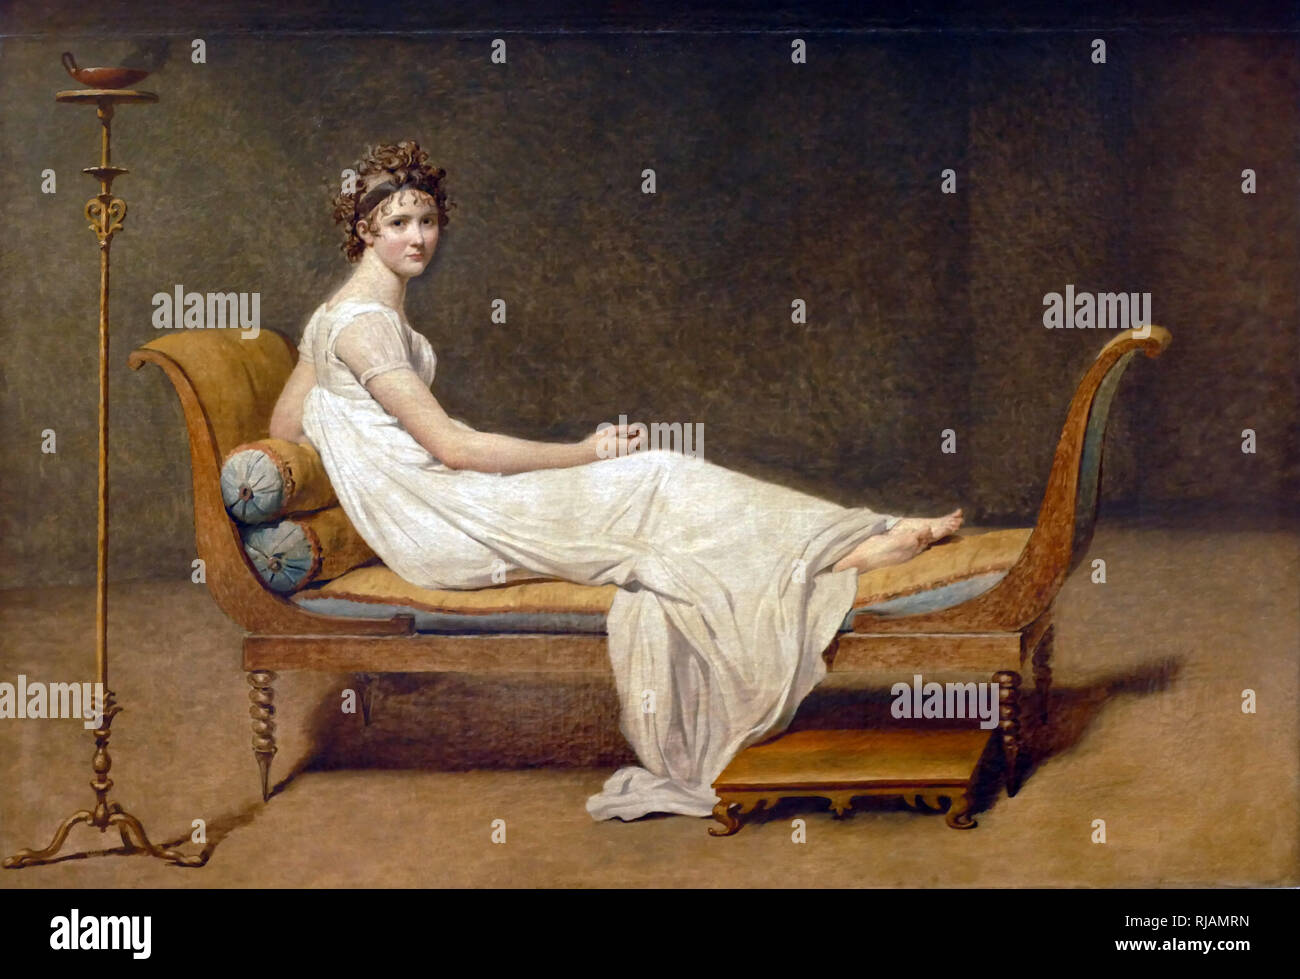 Portrait of Madame Recamier by Jacques-Louis David (1800), Louvre. Jeanne-Francoise Julie Adelaide Recamier (1777 - 1849), known as Juliette, was a French socialite, whose salon drew Parisians from the leading literary and political circles of the early 19th century. Stock Photo